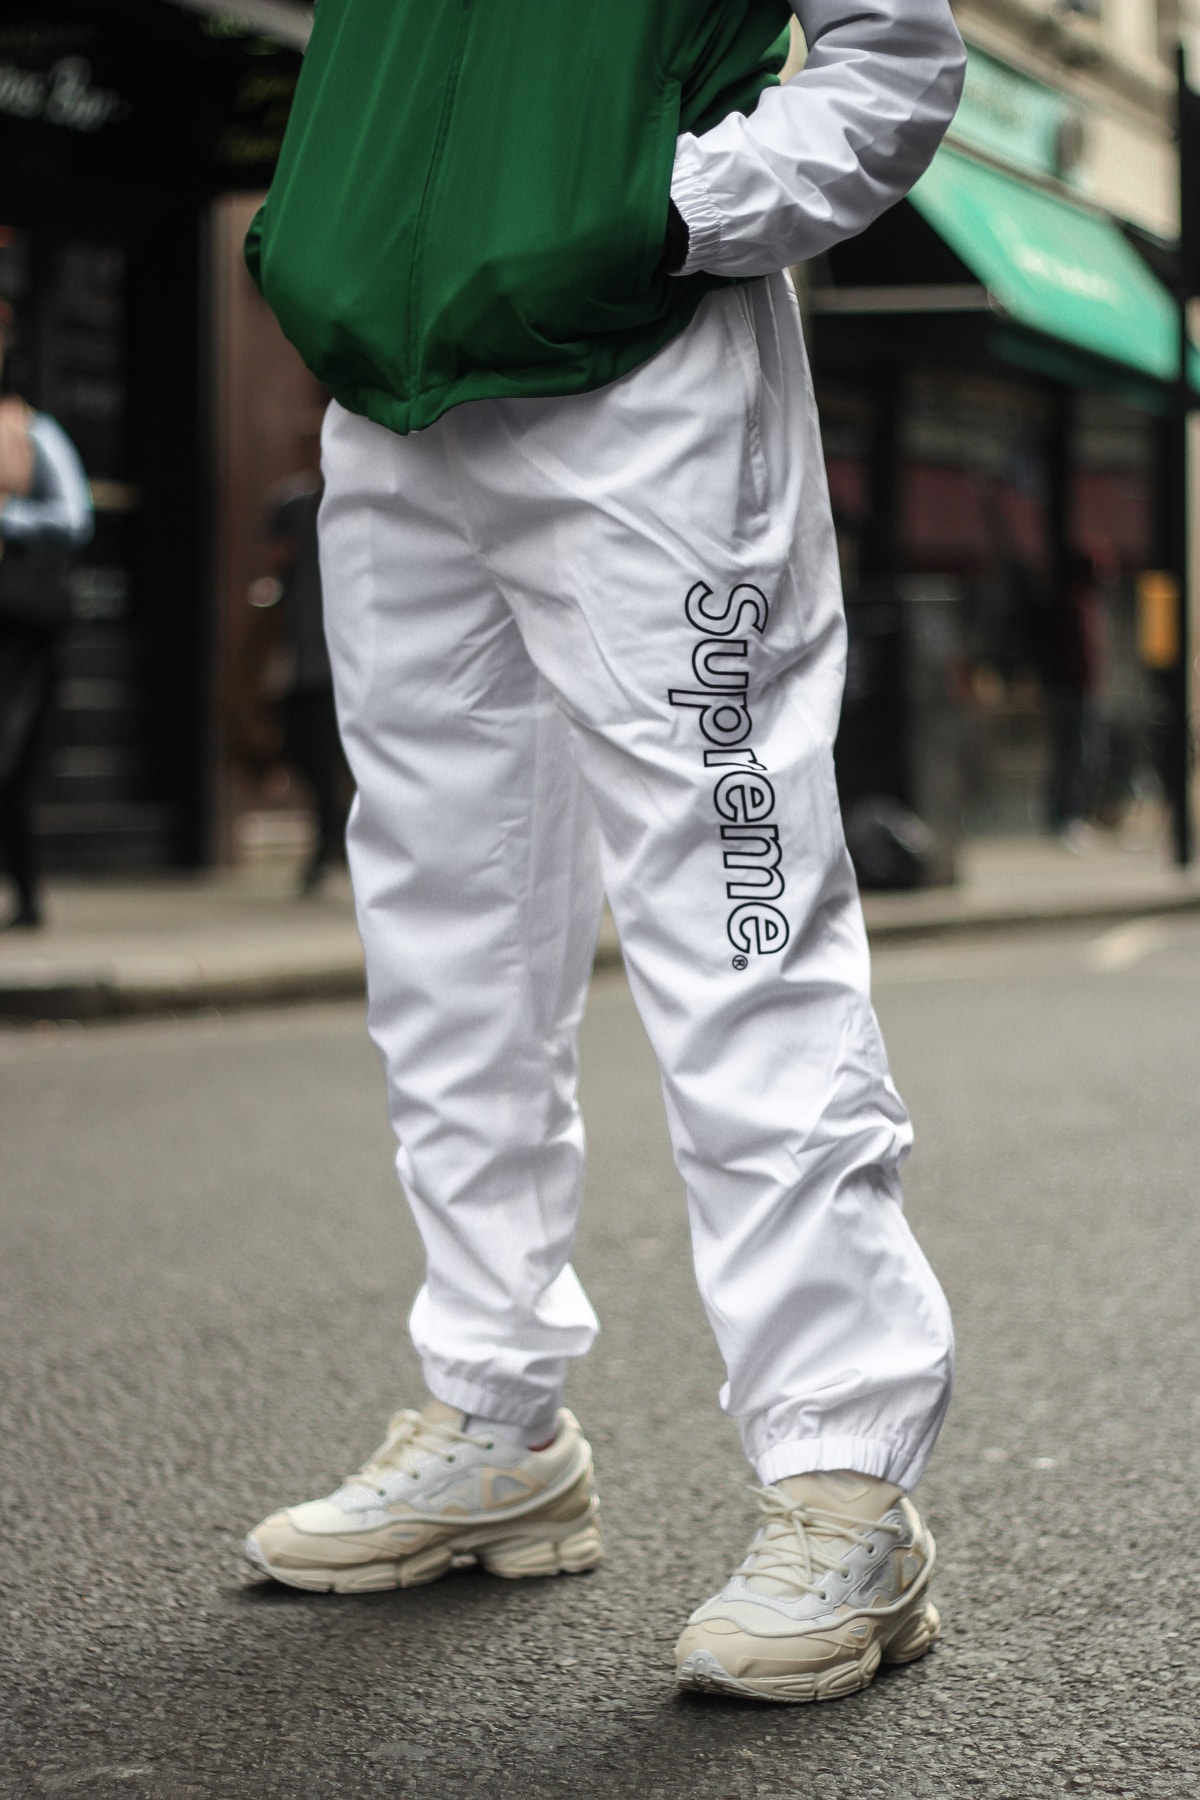 Lacoste x Supreme White Track Pants Green Track Jacket